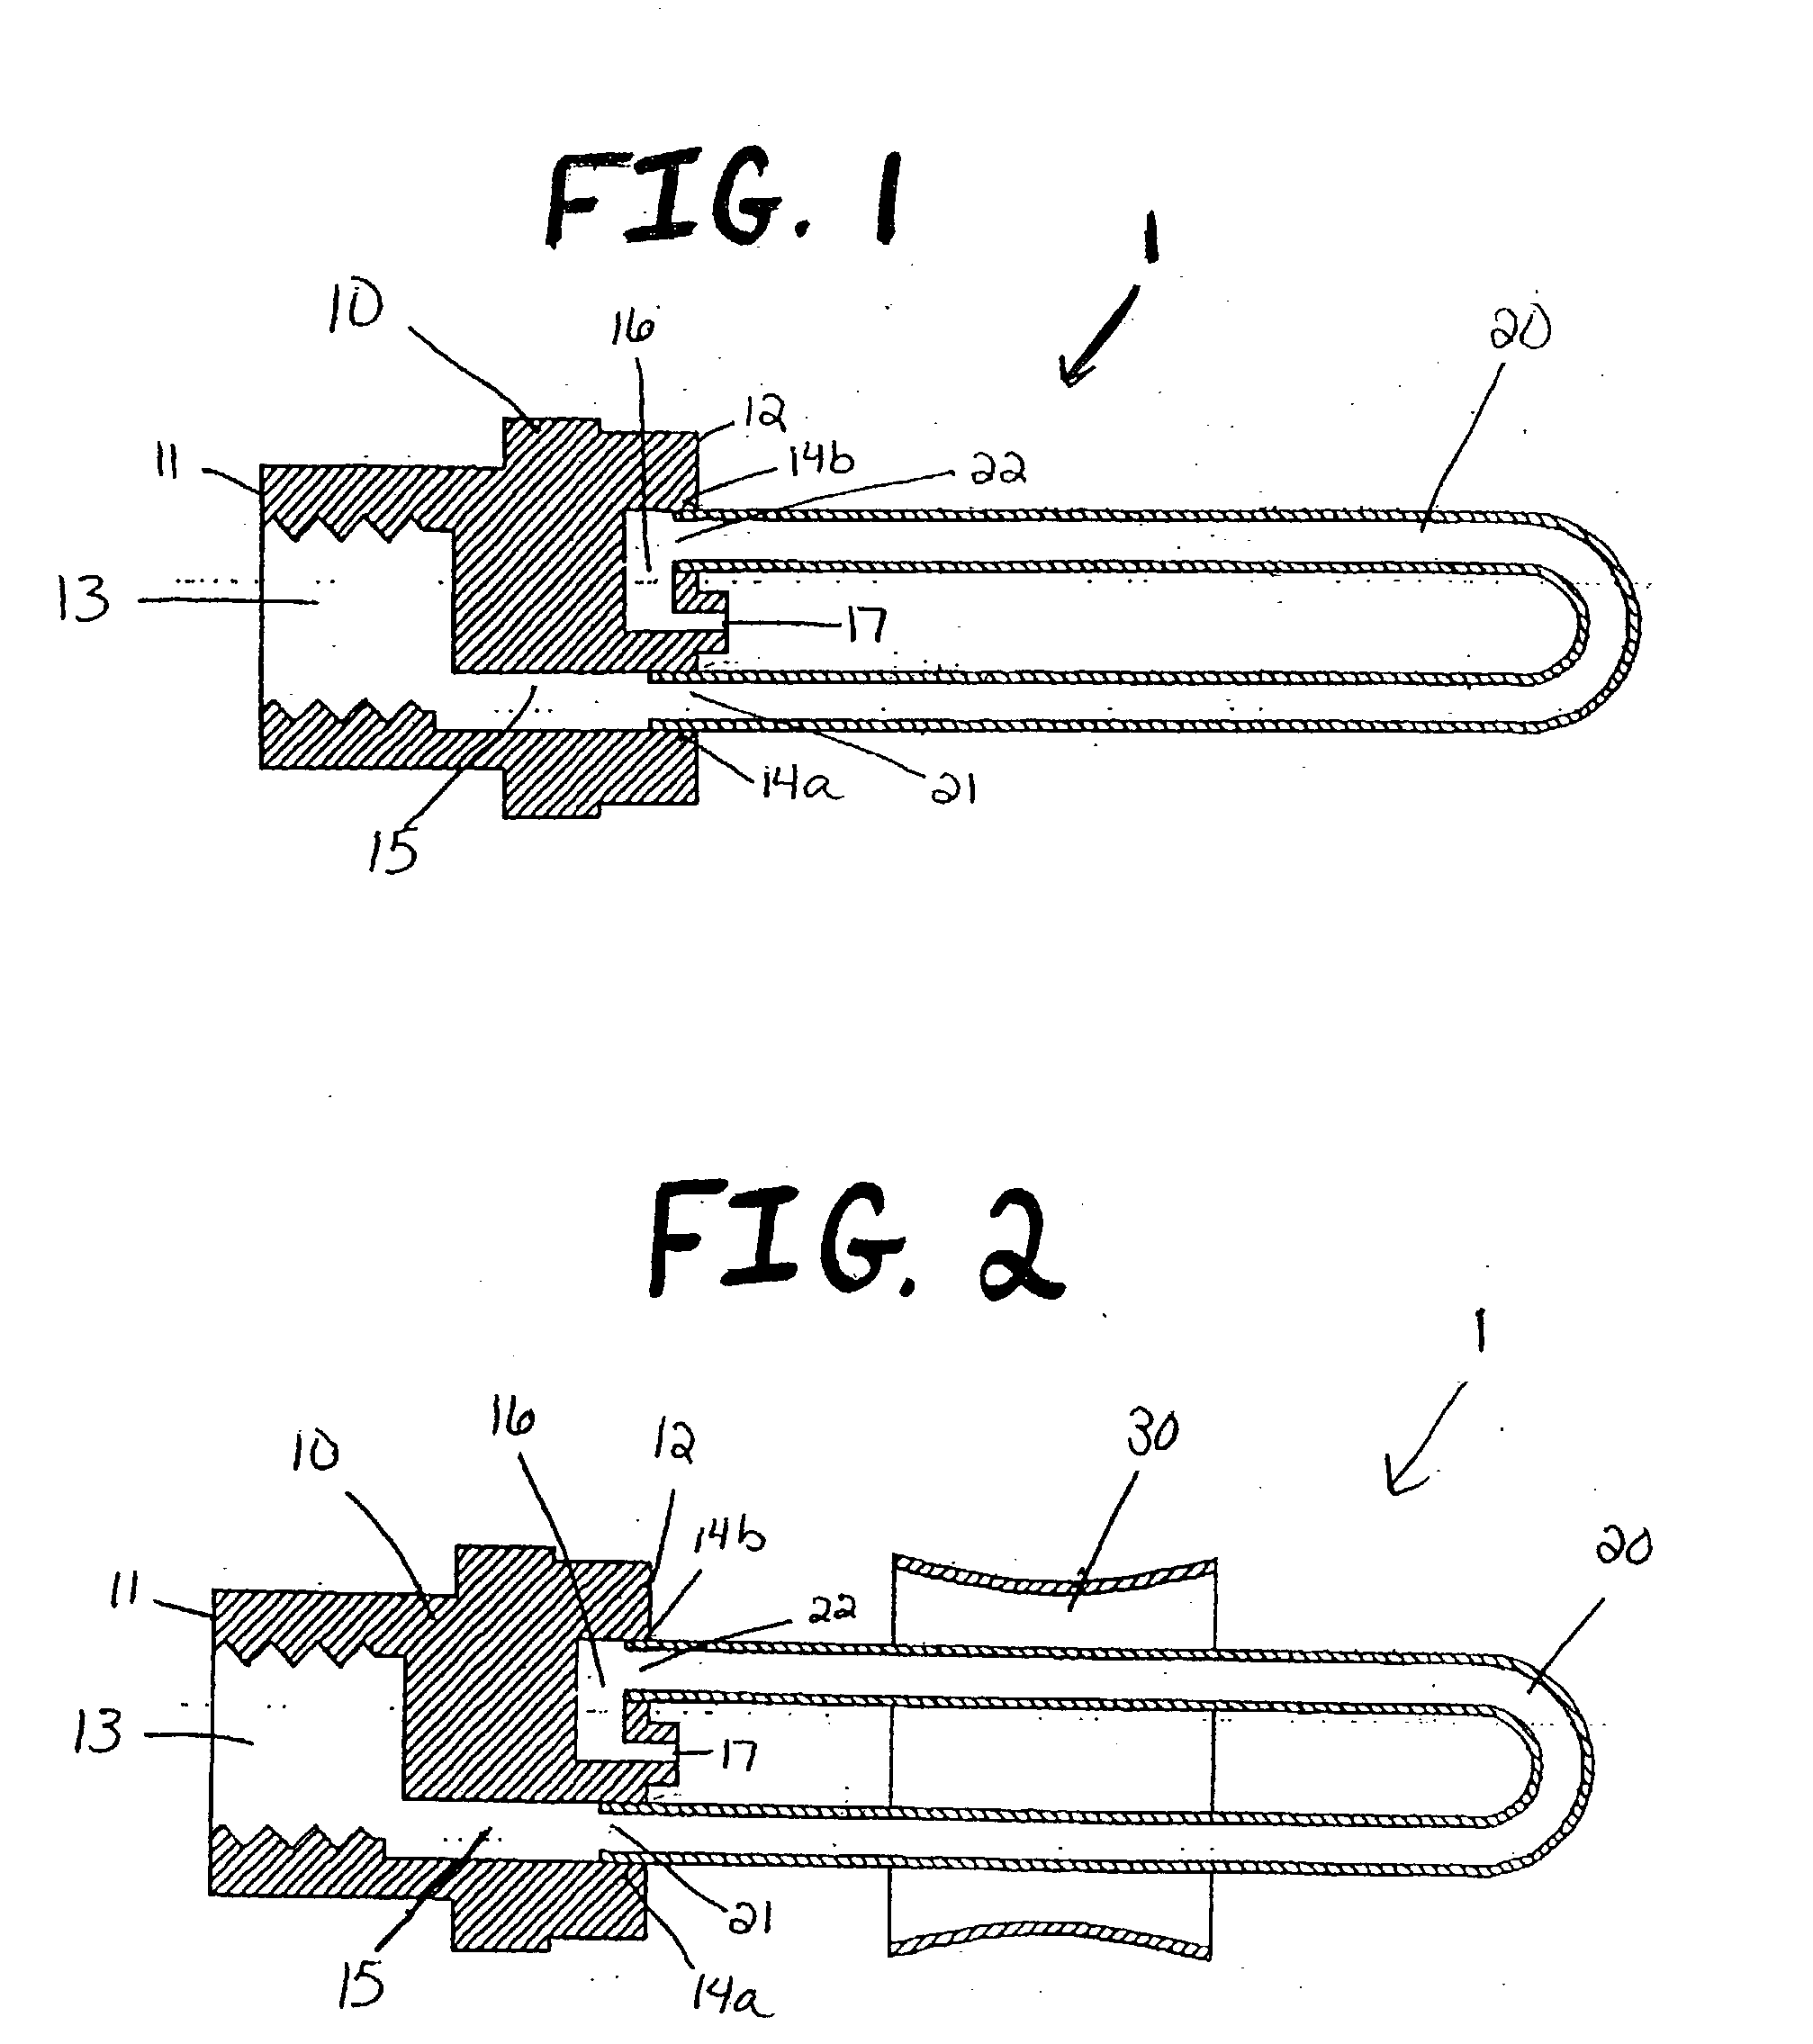 Fuel pre-heating device